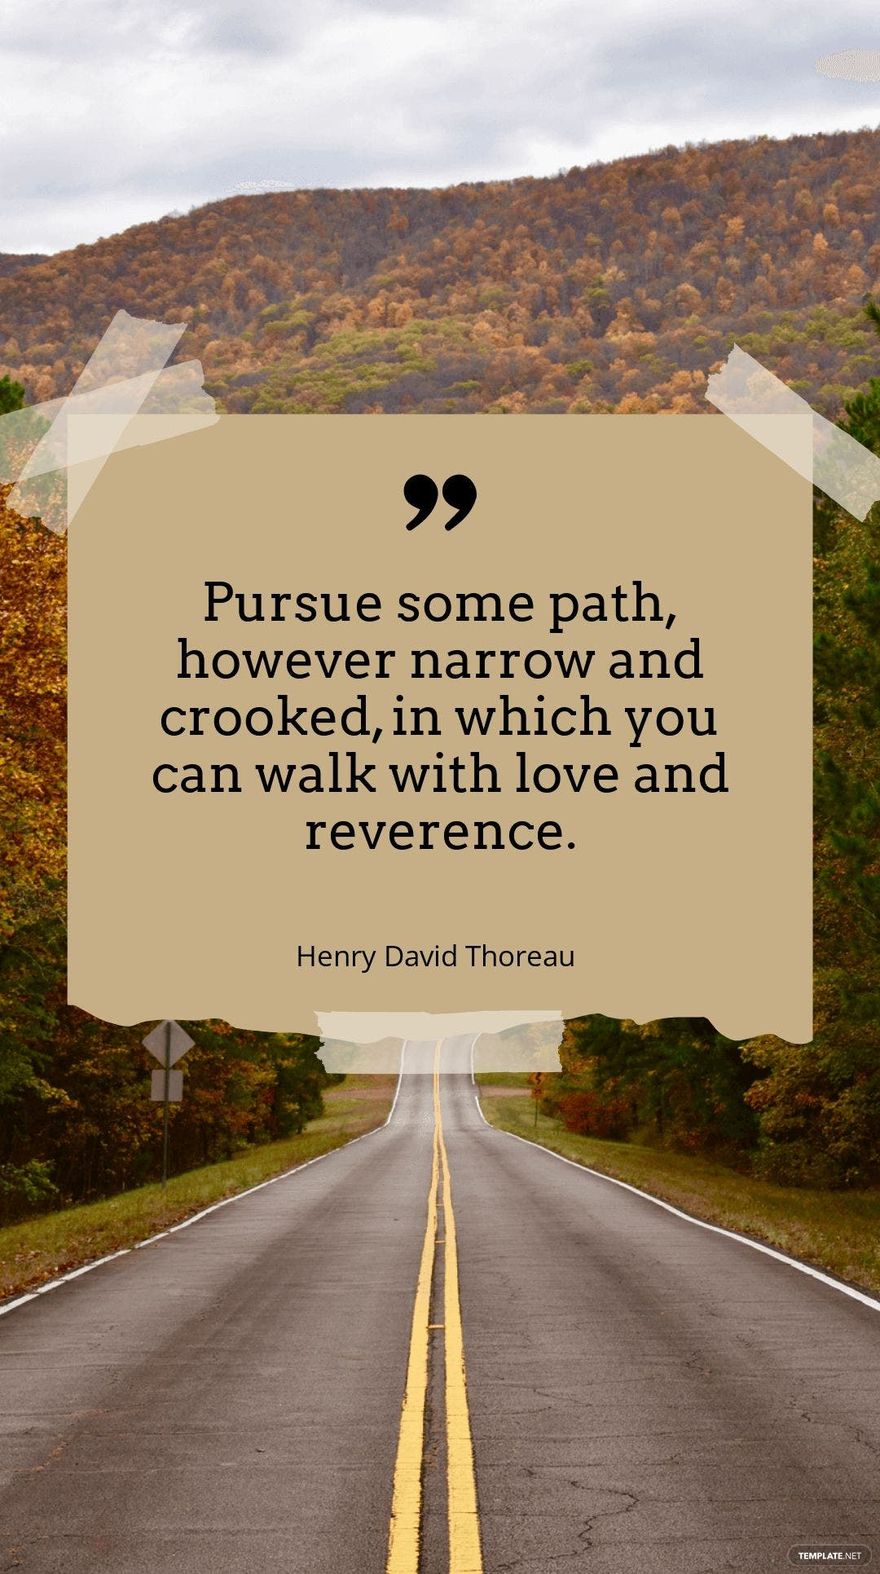 Henry David Thoreau - "Pursue some path, however narrow and crooked, in which you can walk with love and reverence.”